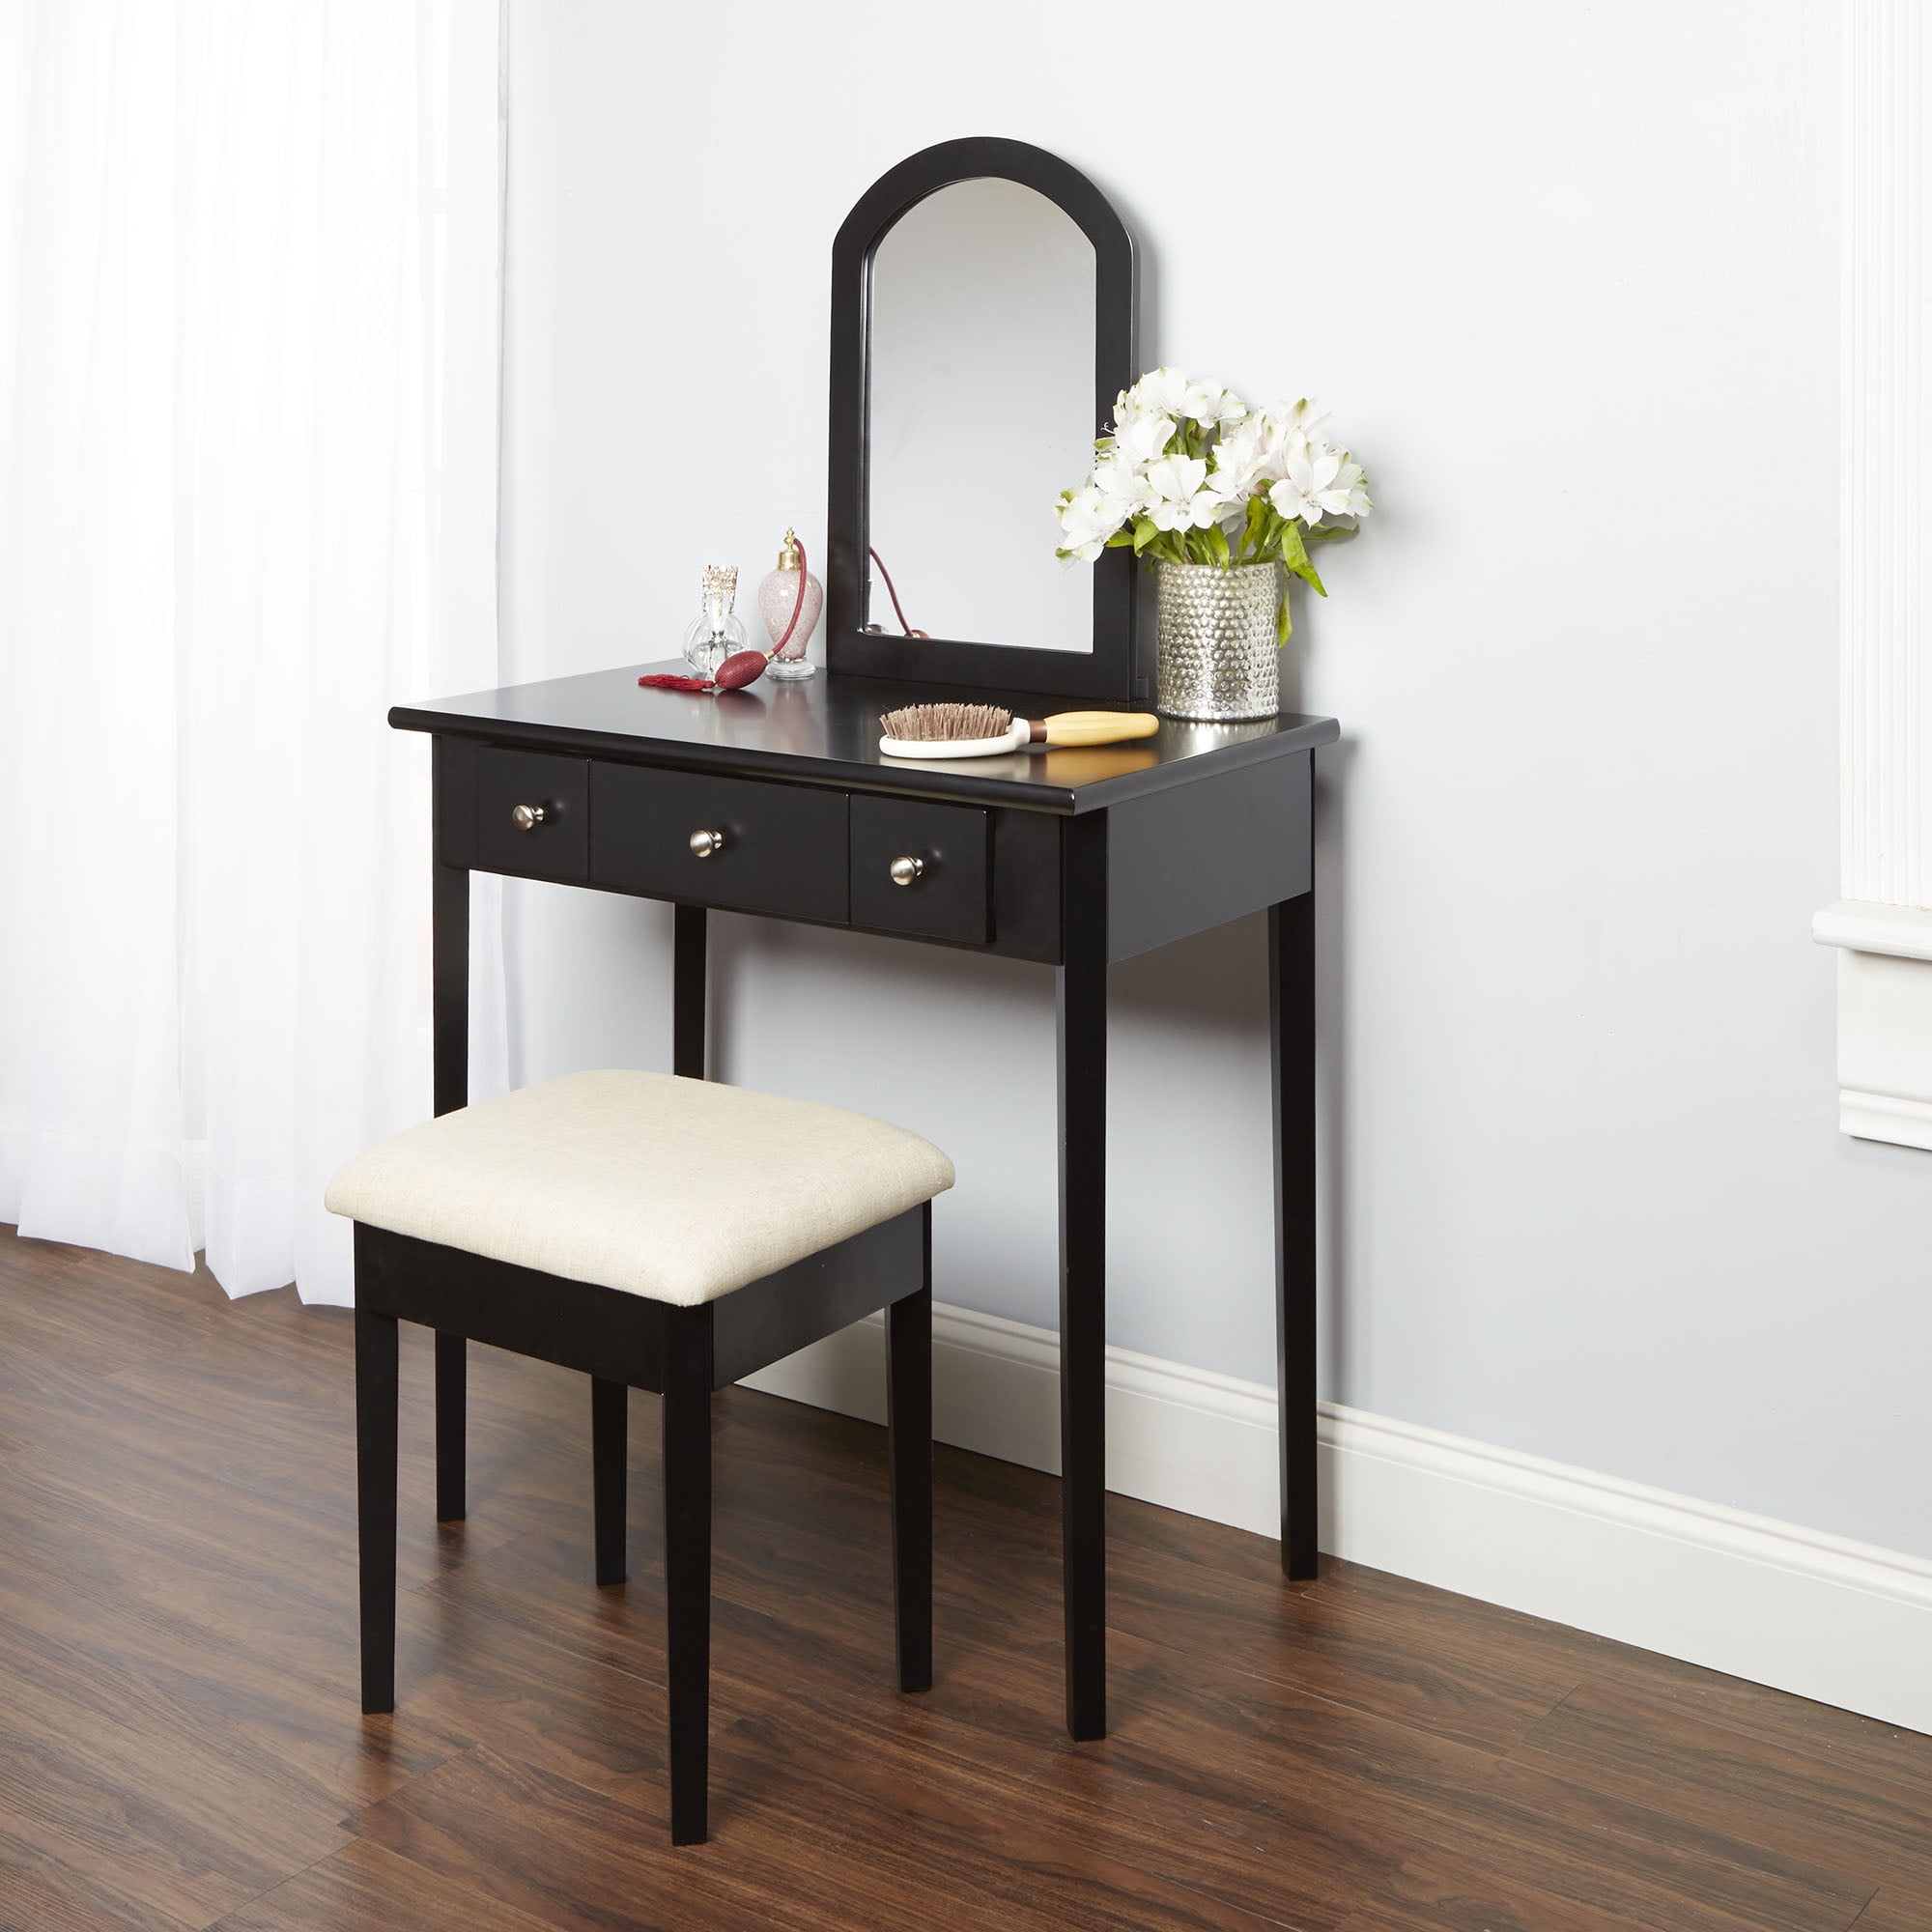 Mainstays Mirror Vanity With Bench Powered Outlet And 2 Usb Ports Black Walmart Com Walmart Com